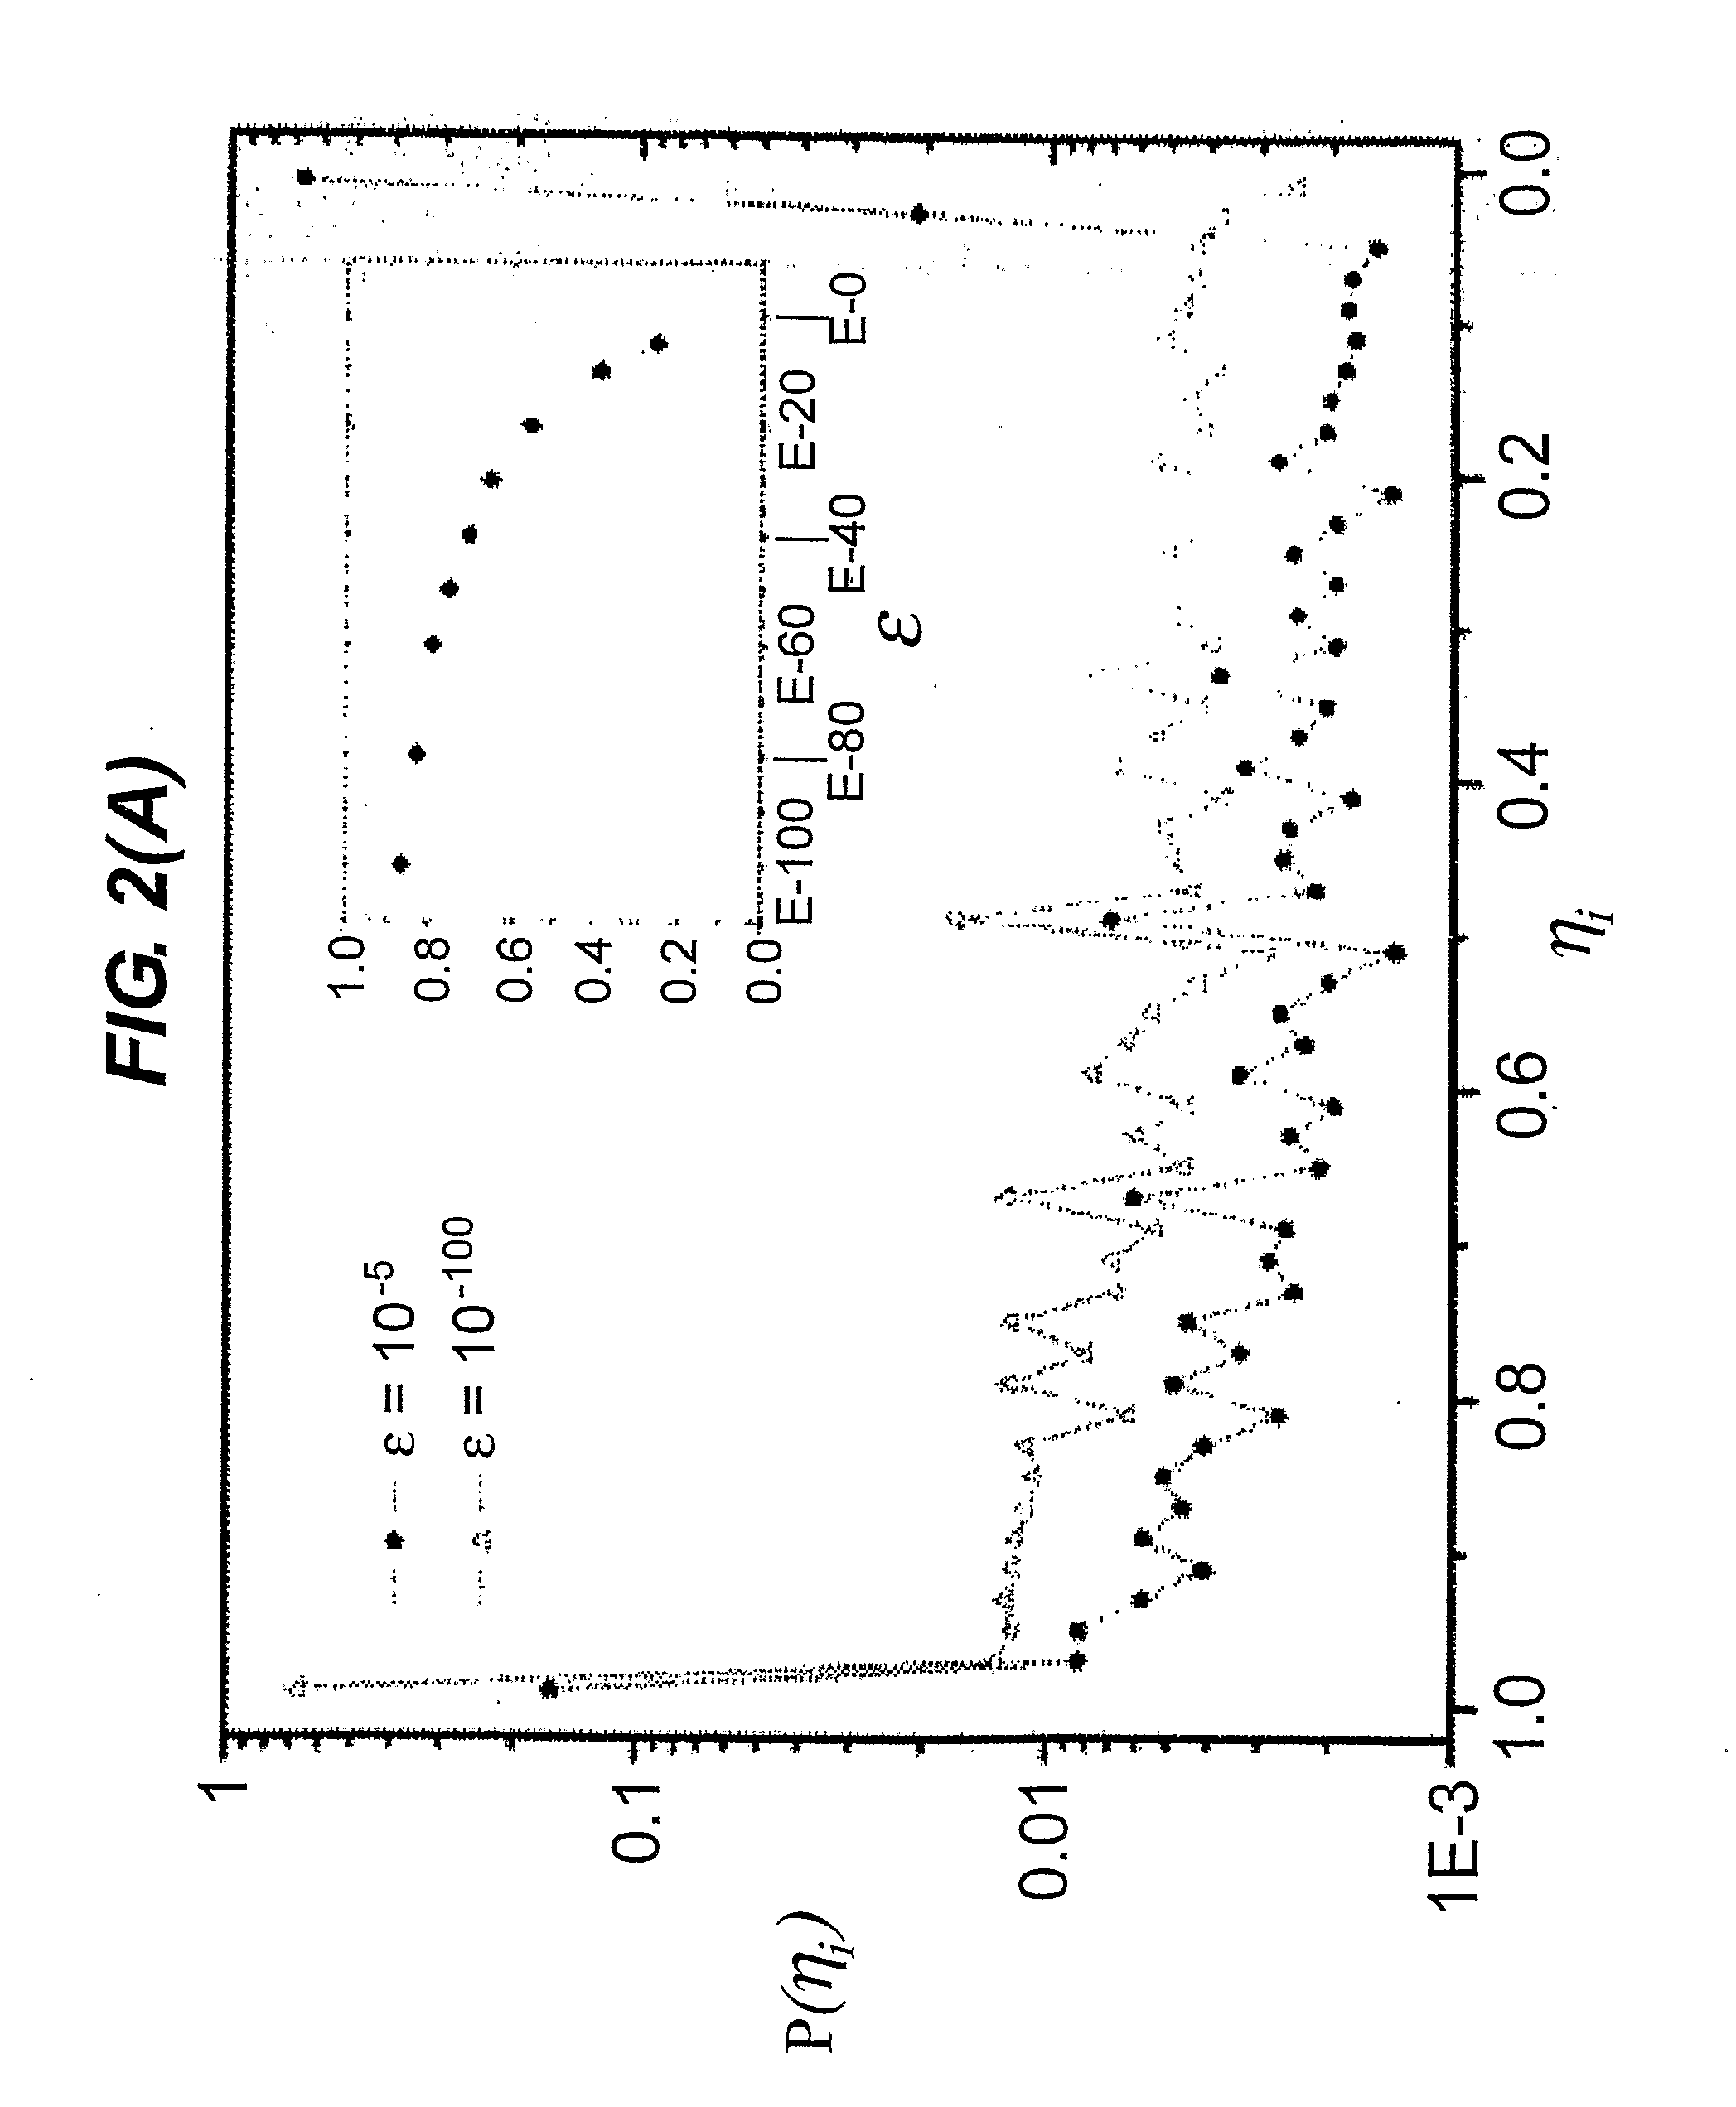 Methods of Clustering Gene and Protein Sequences